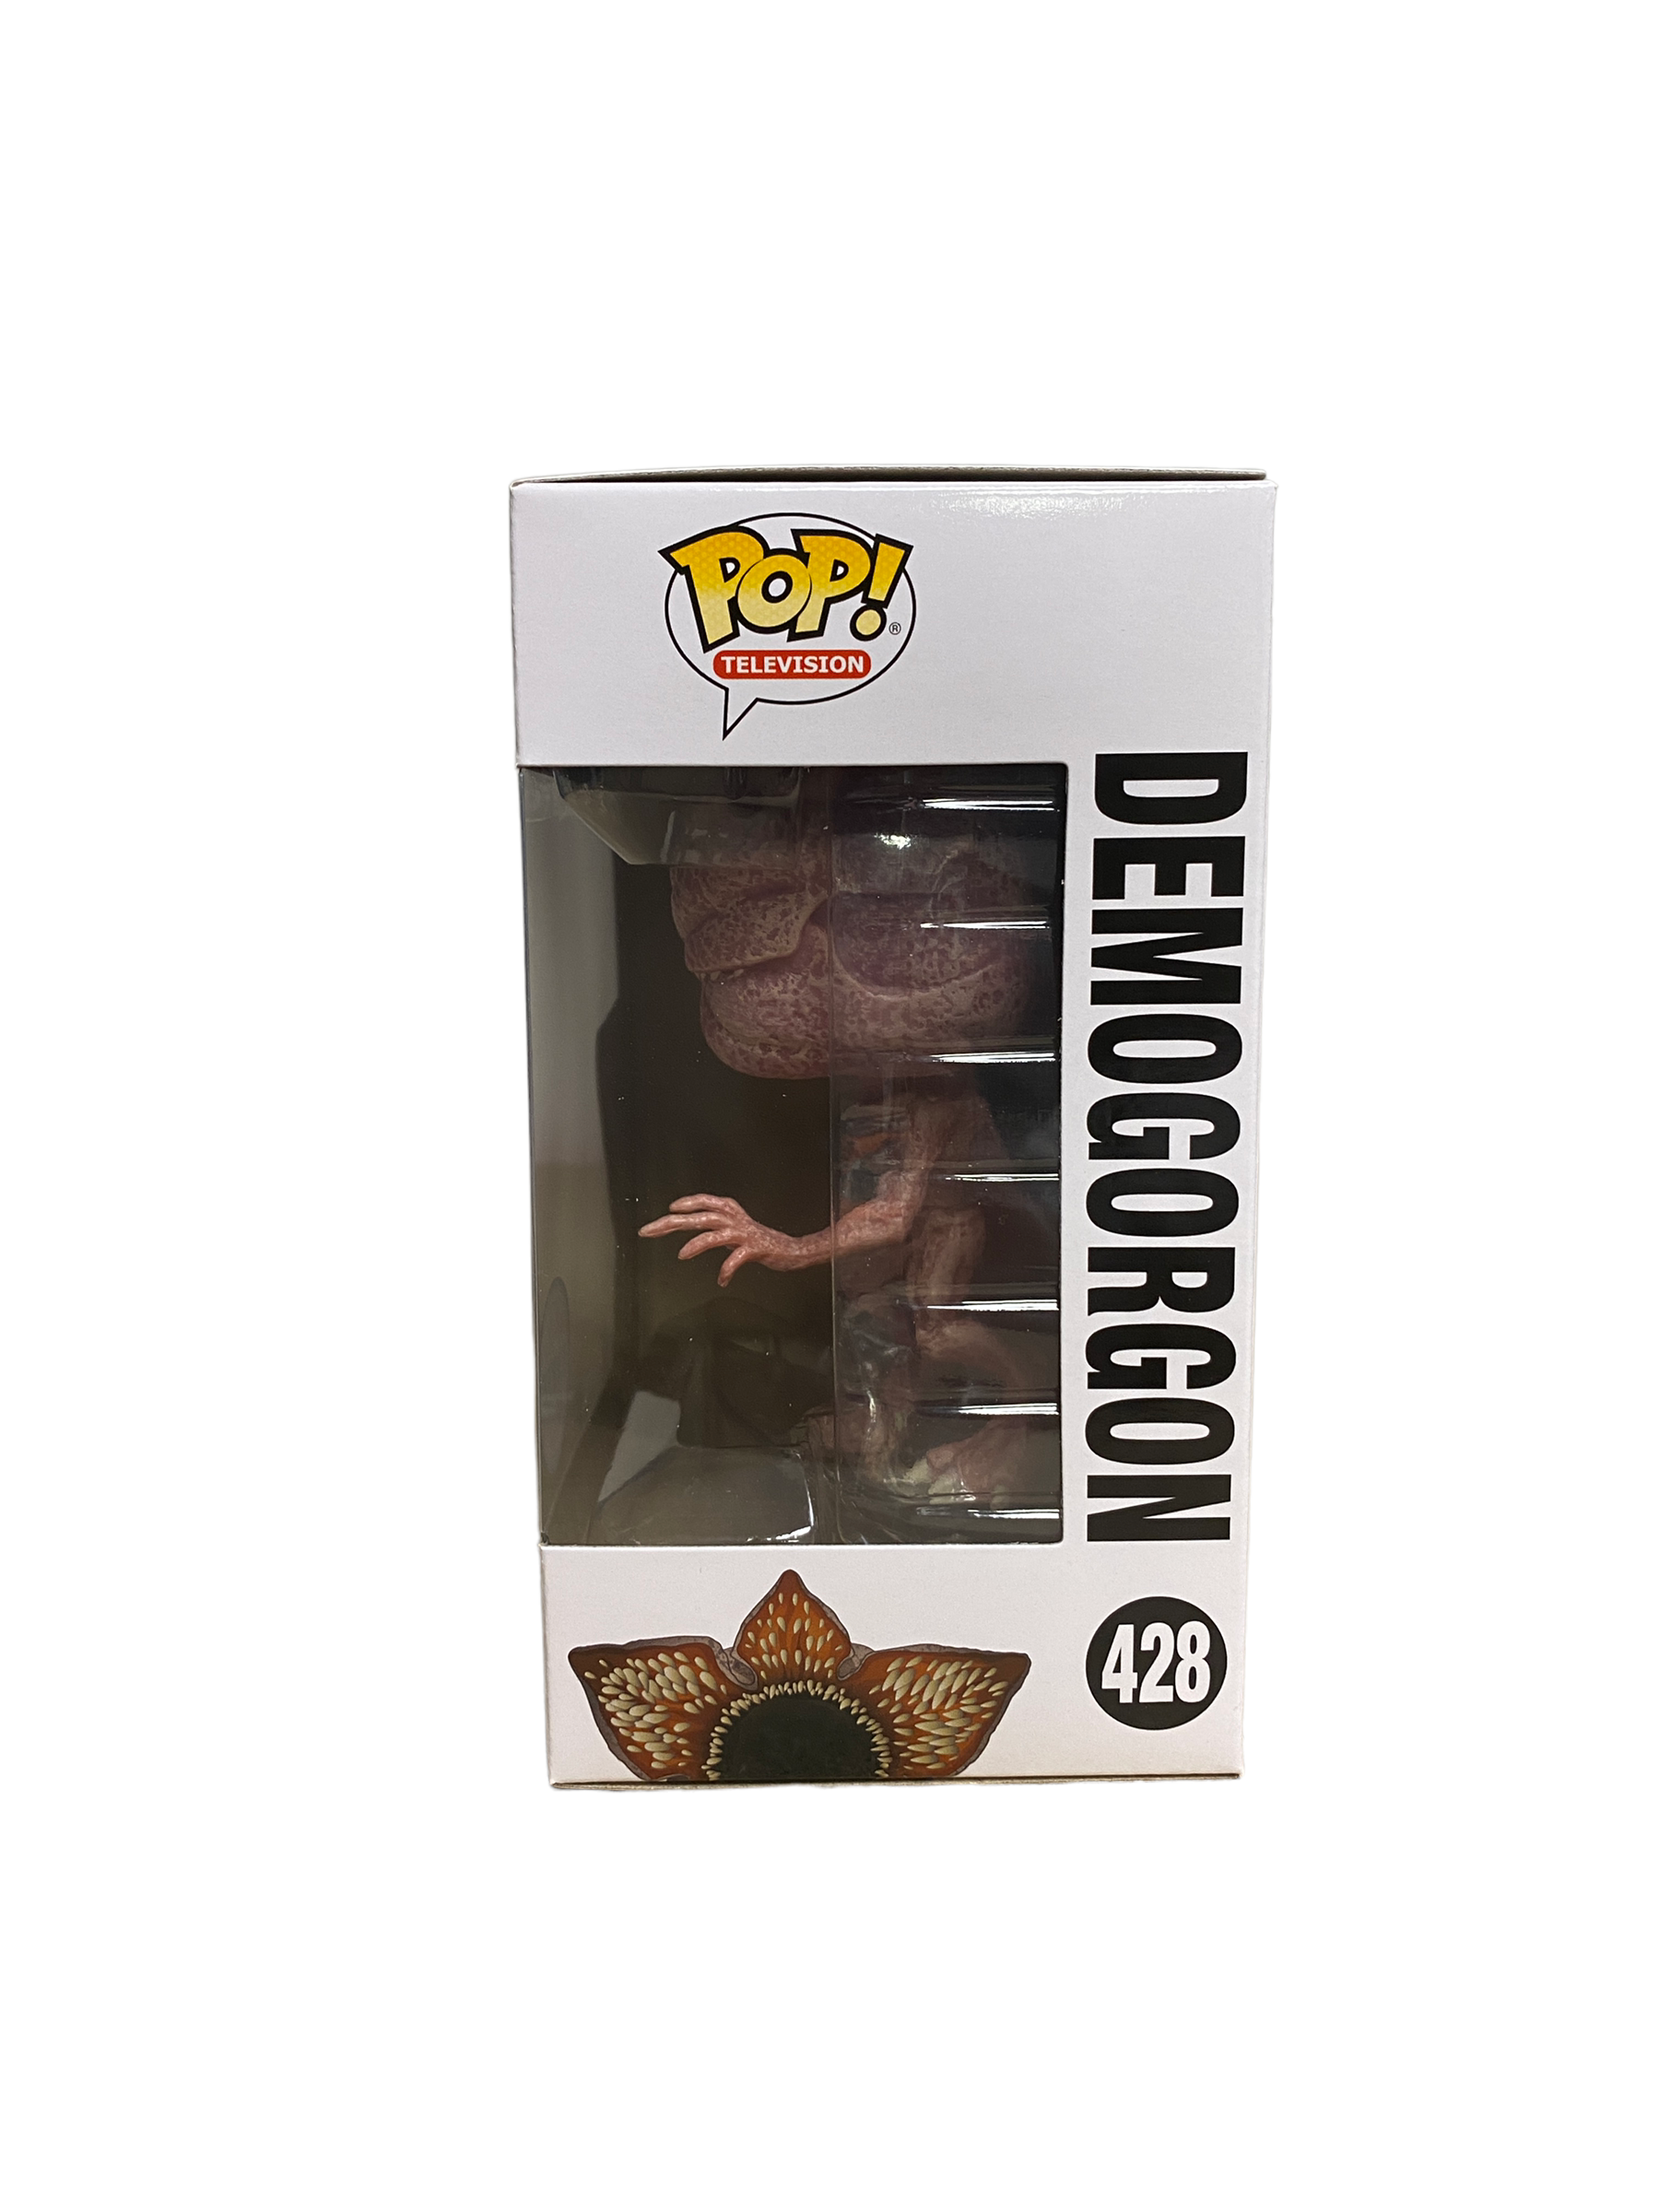 Demogorgon #428 (Closed Mouth Chase) Funko Pop! - Stranger Things - 2022 Pop! - Condition 9.5/10